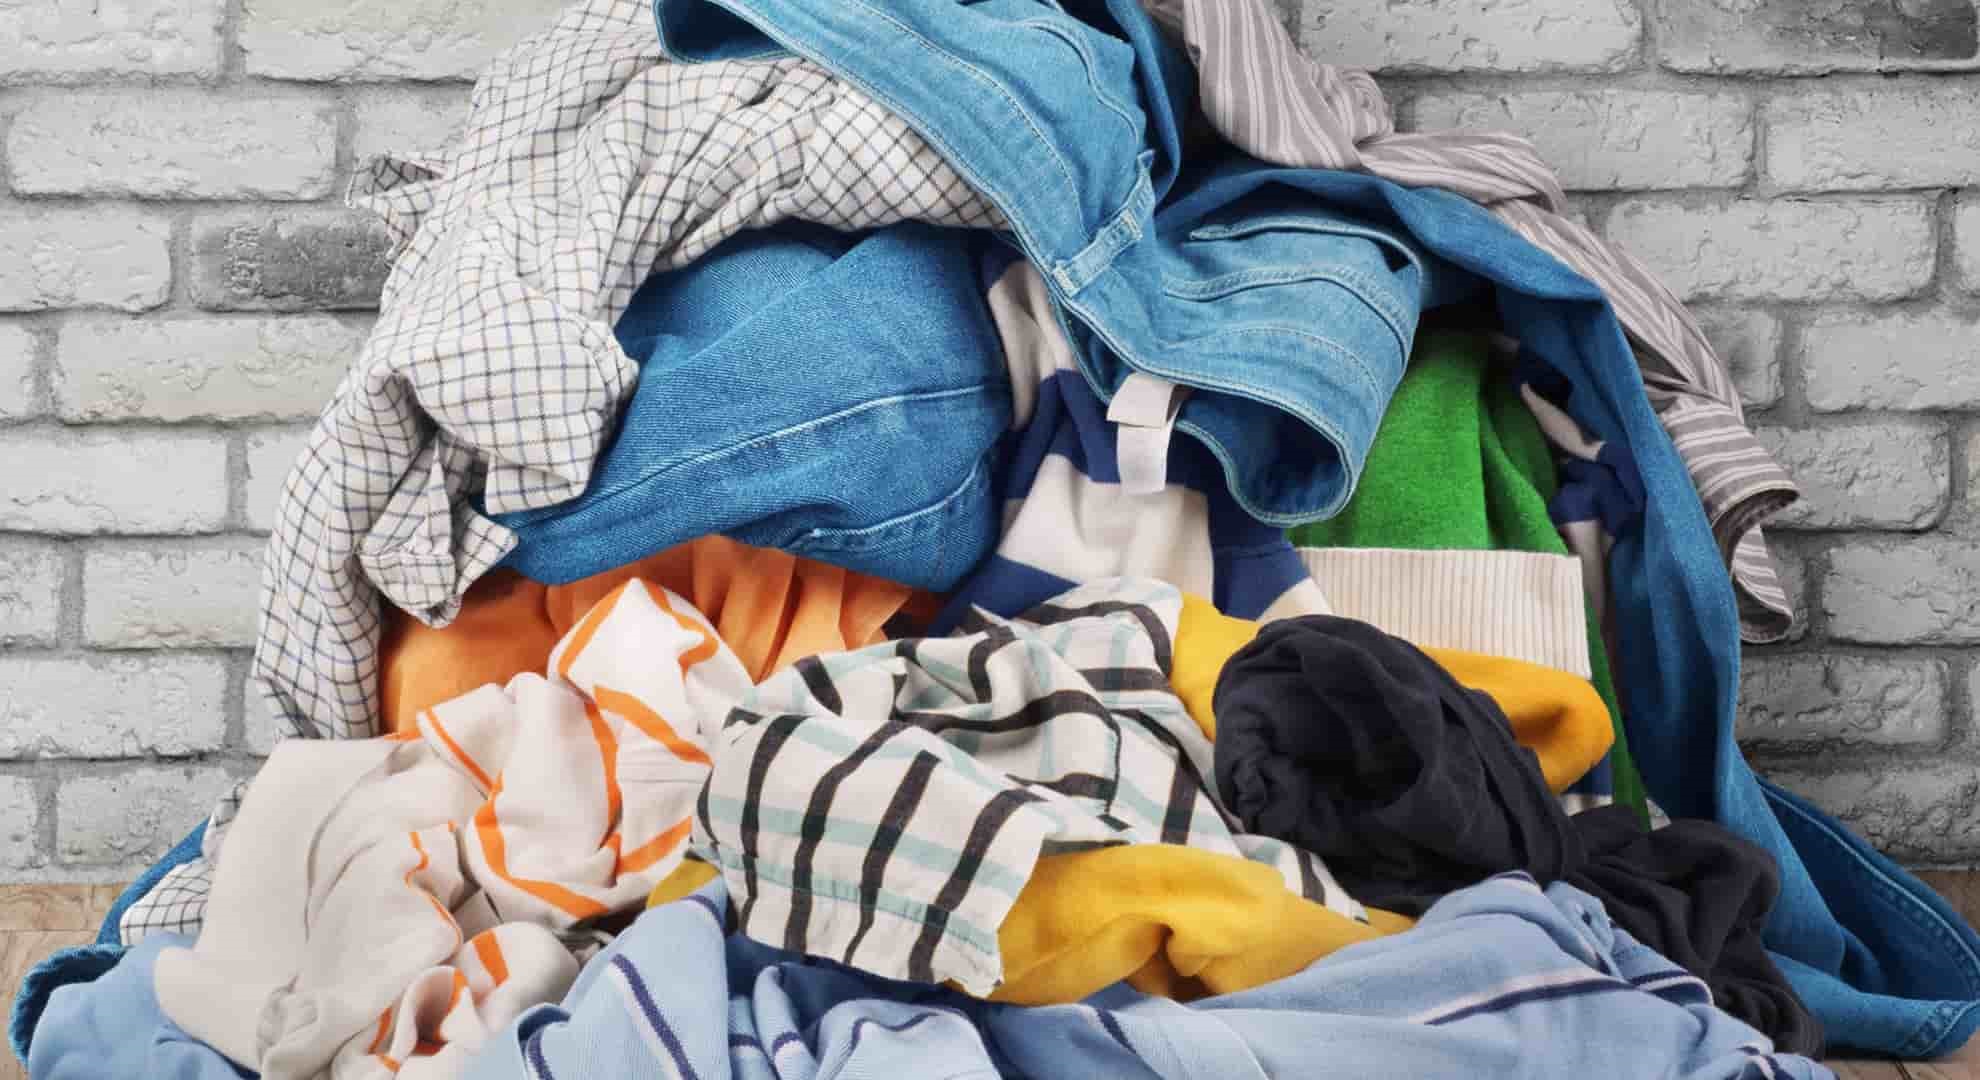 Clothing and textiles, Recycling